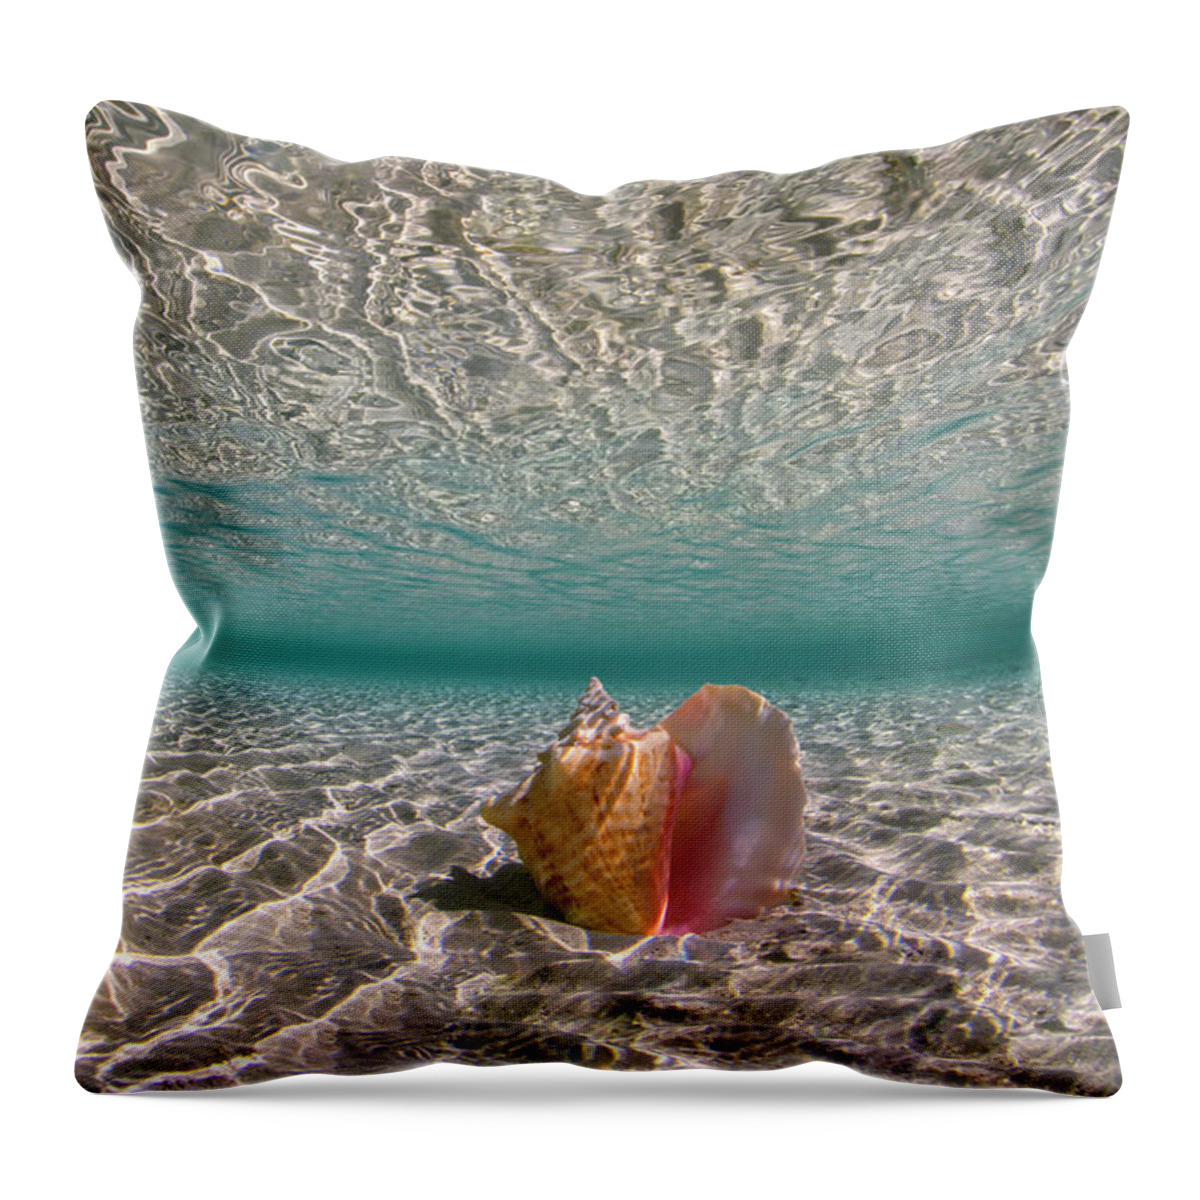 Shell Throw Pillow featuring the photograph Shallow Conch by Tanya G Burnett